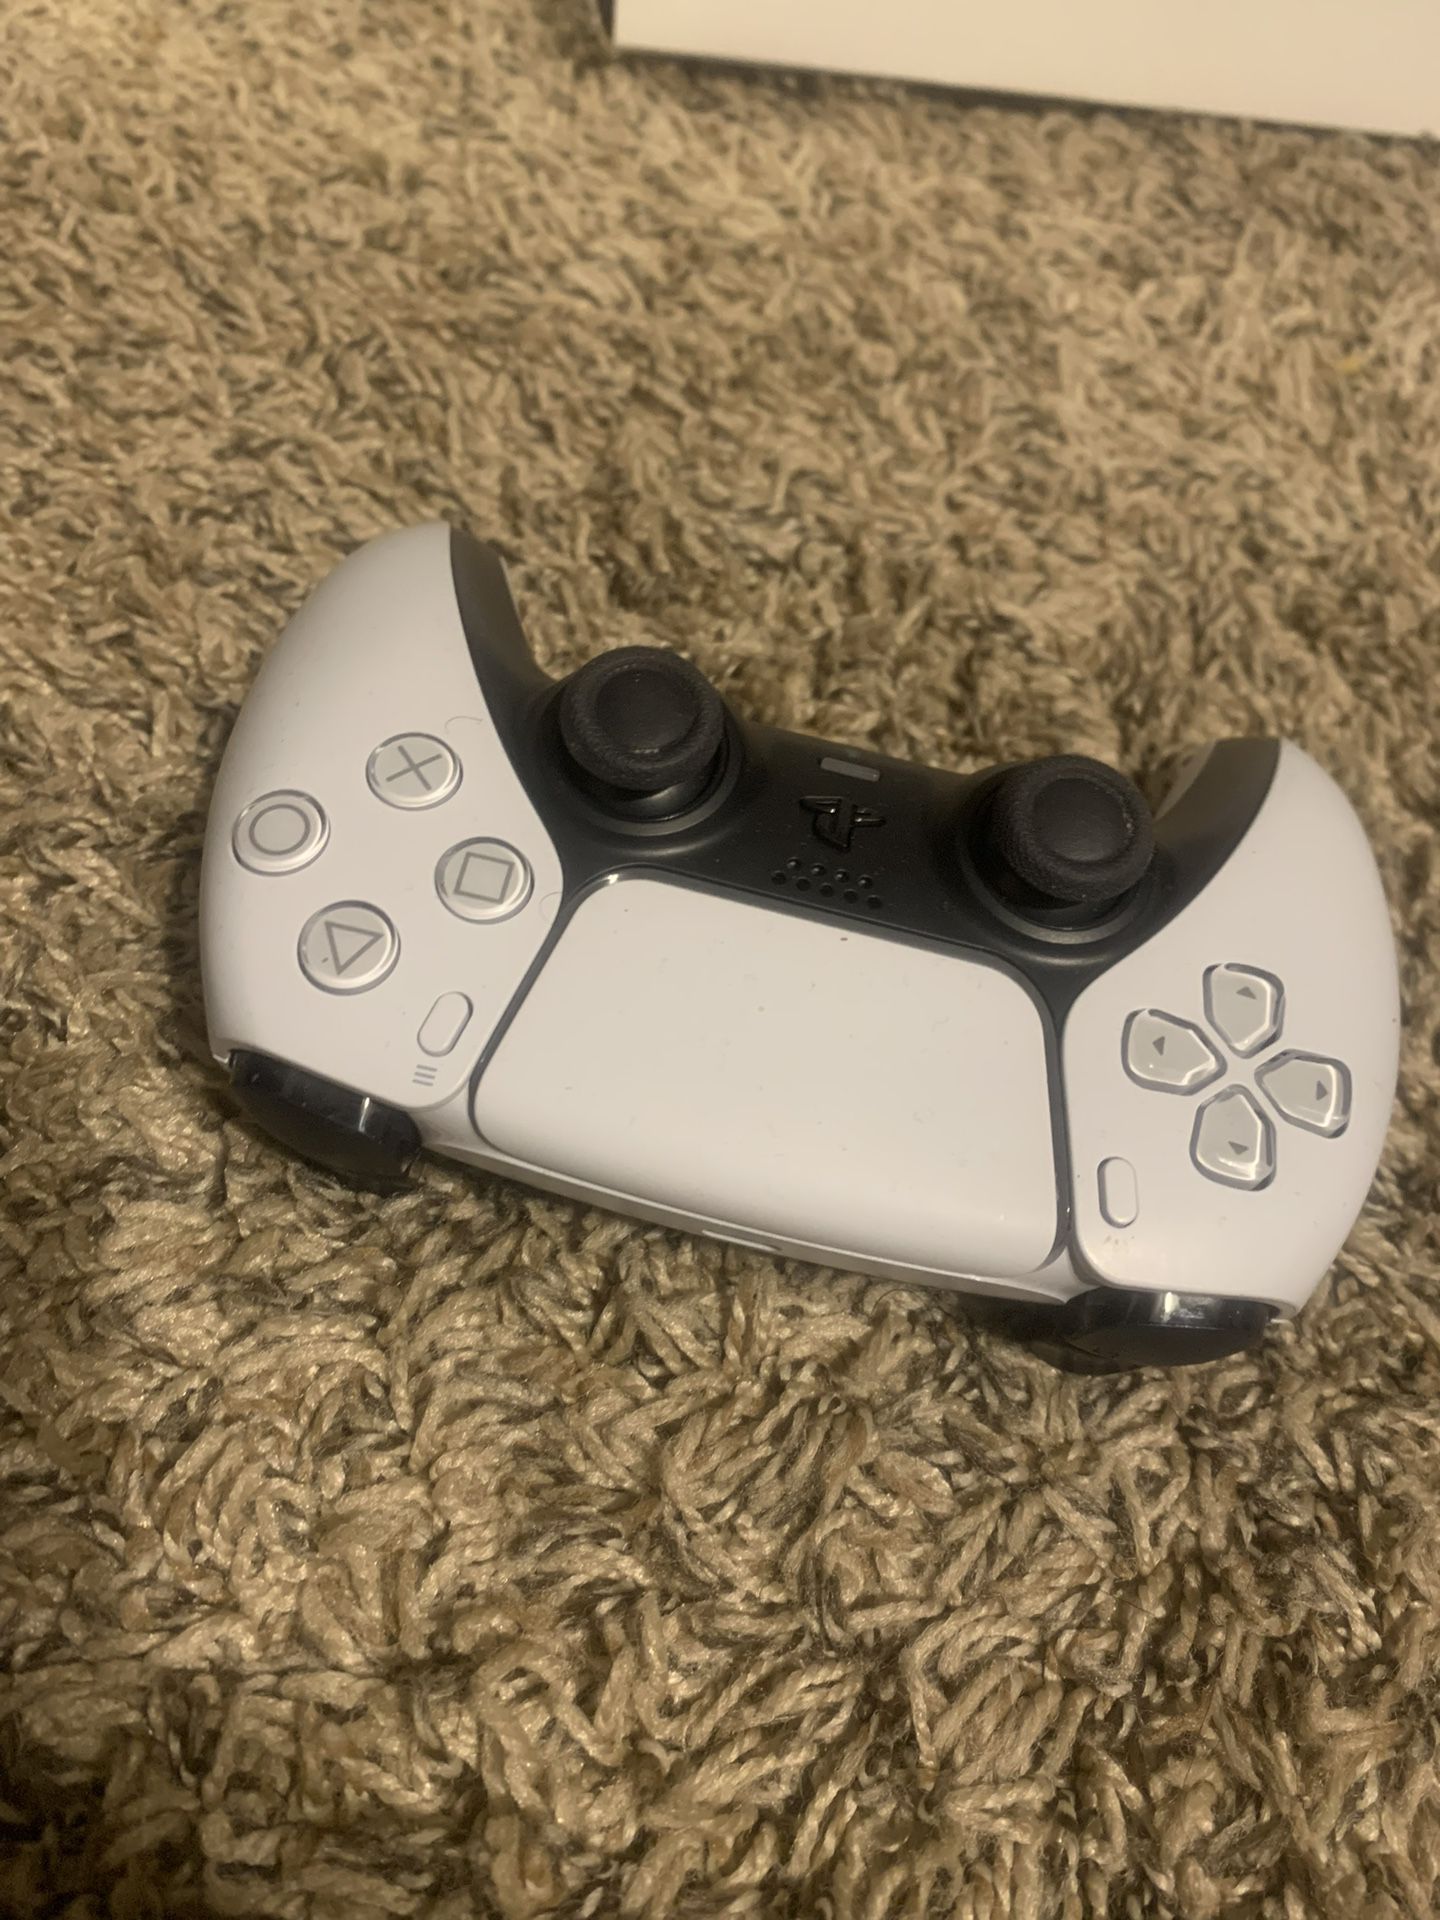 Ps5 Controller (brand New)